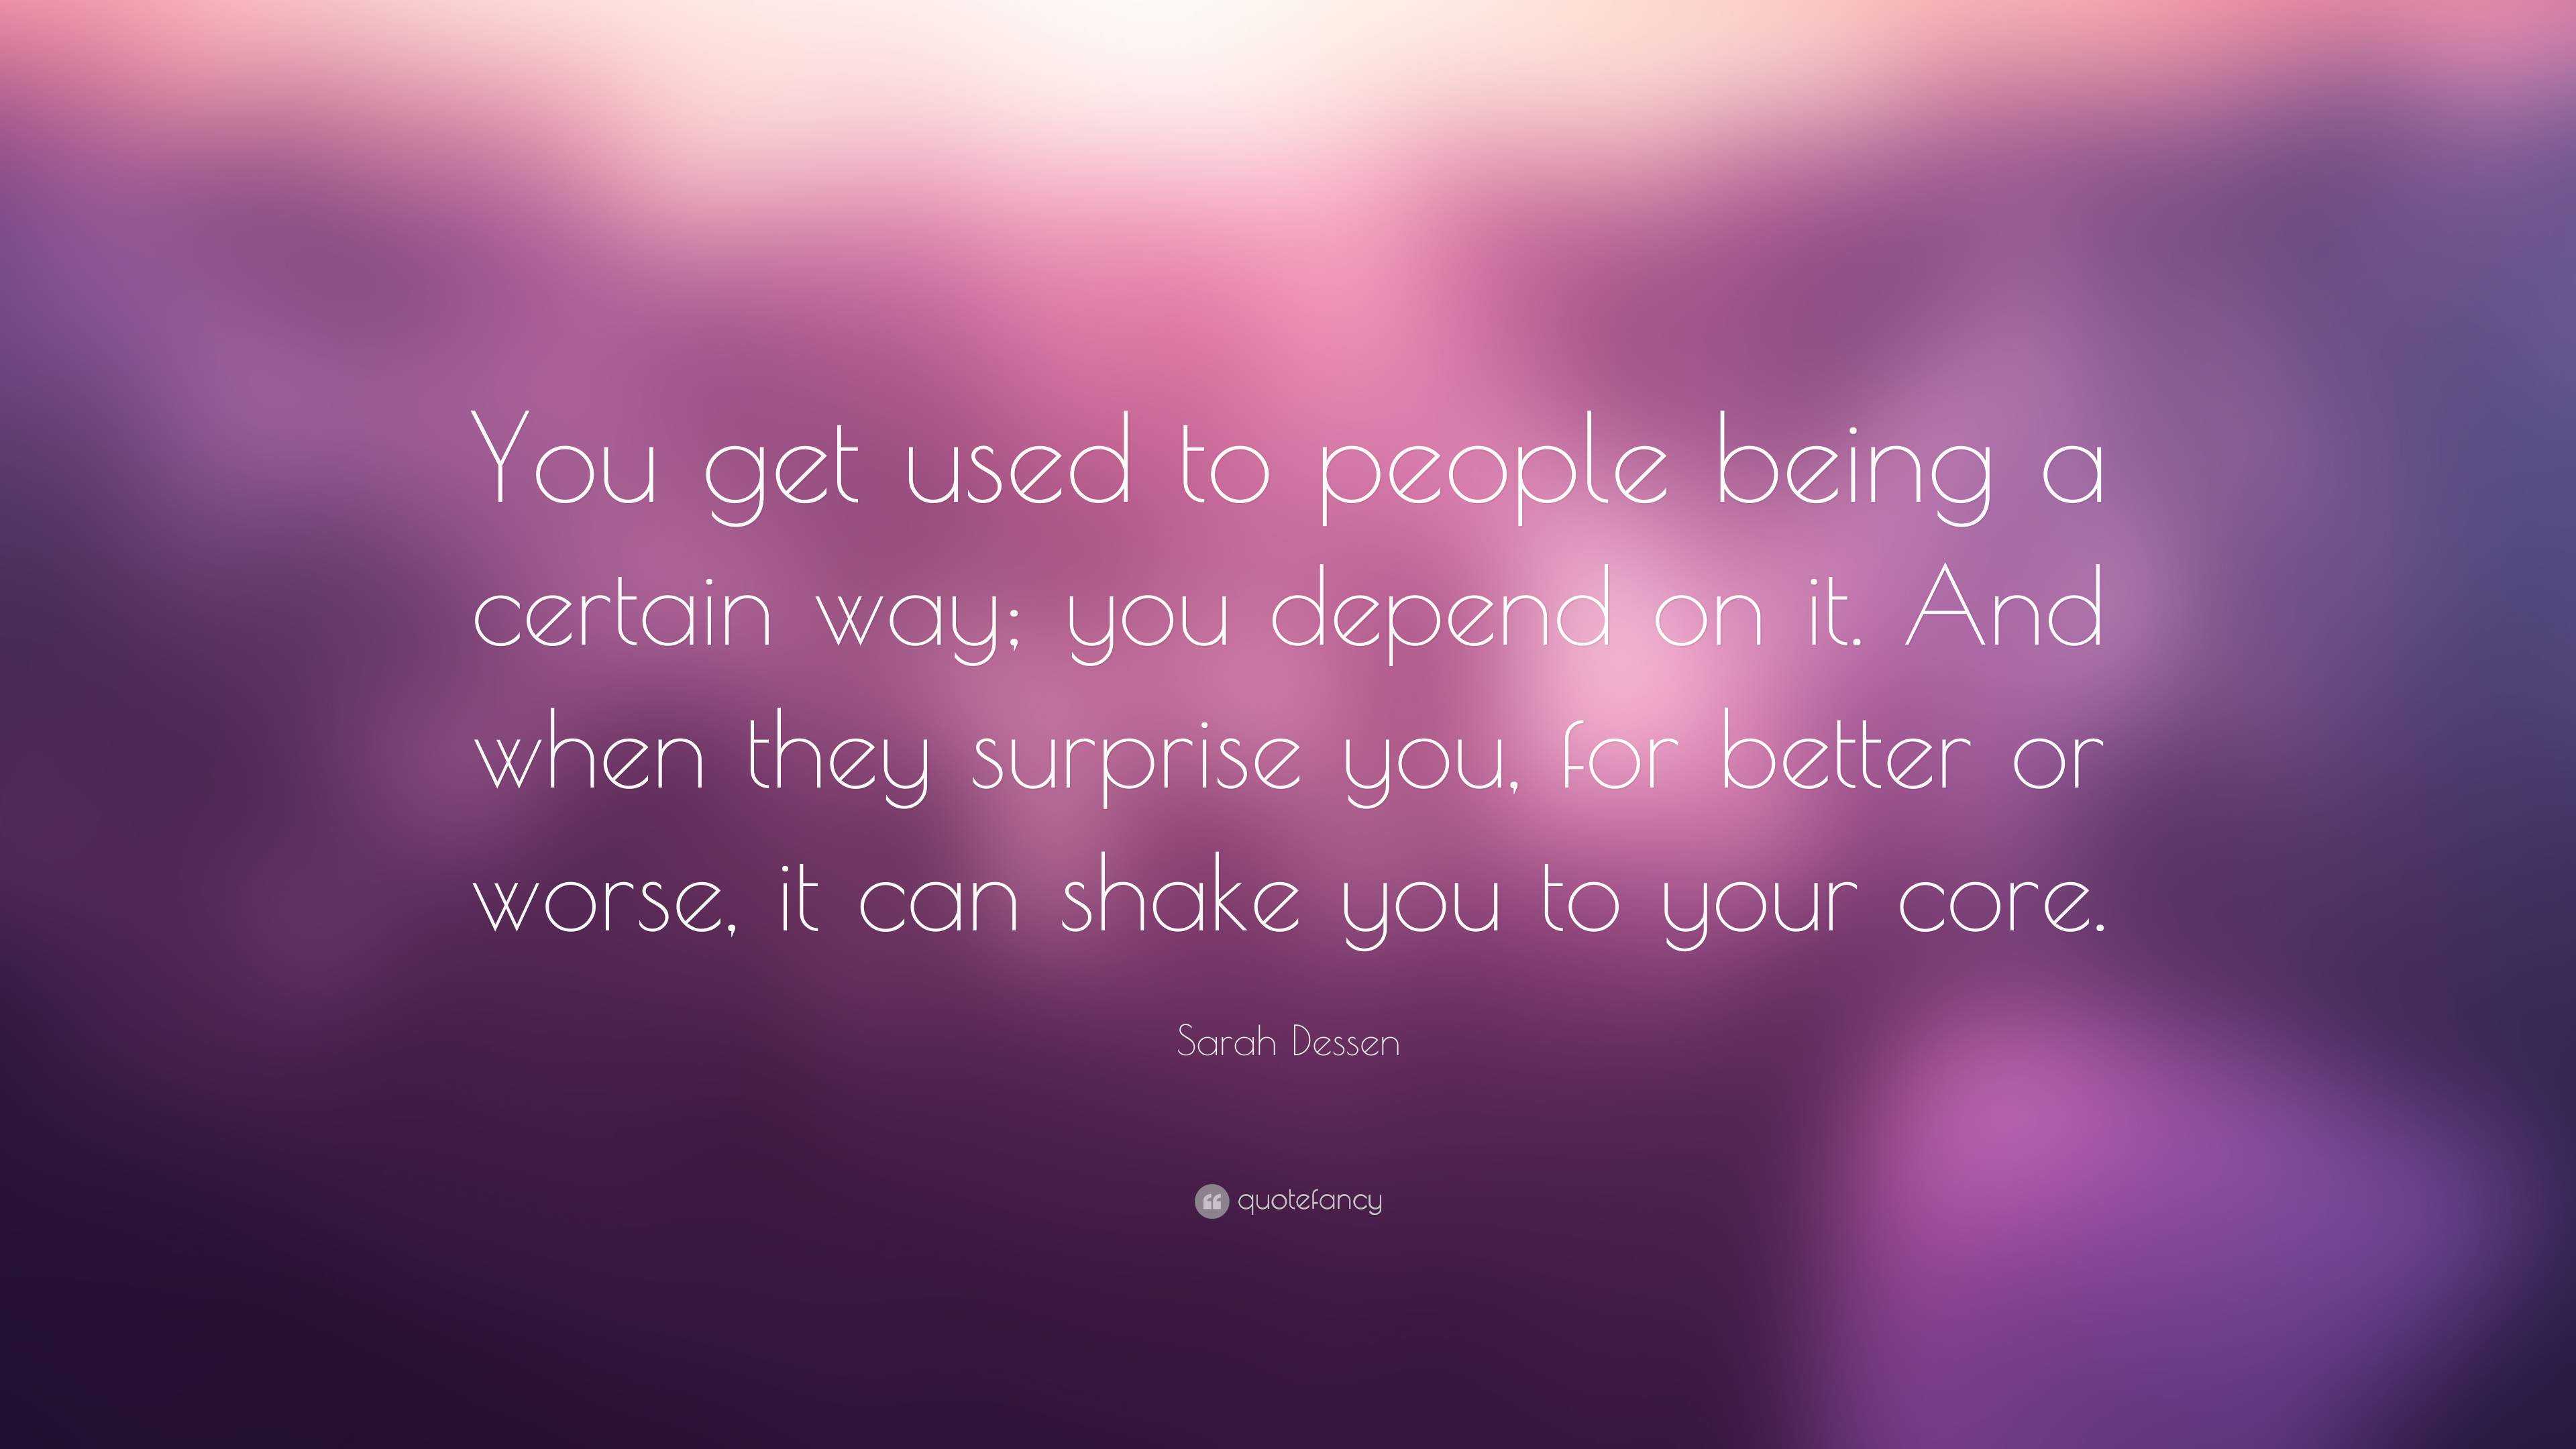 Sarah Dessen Quote: “You get used to people being a certain way; you ...